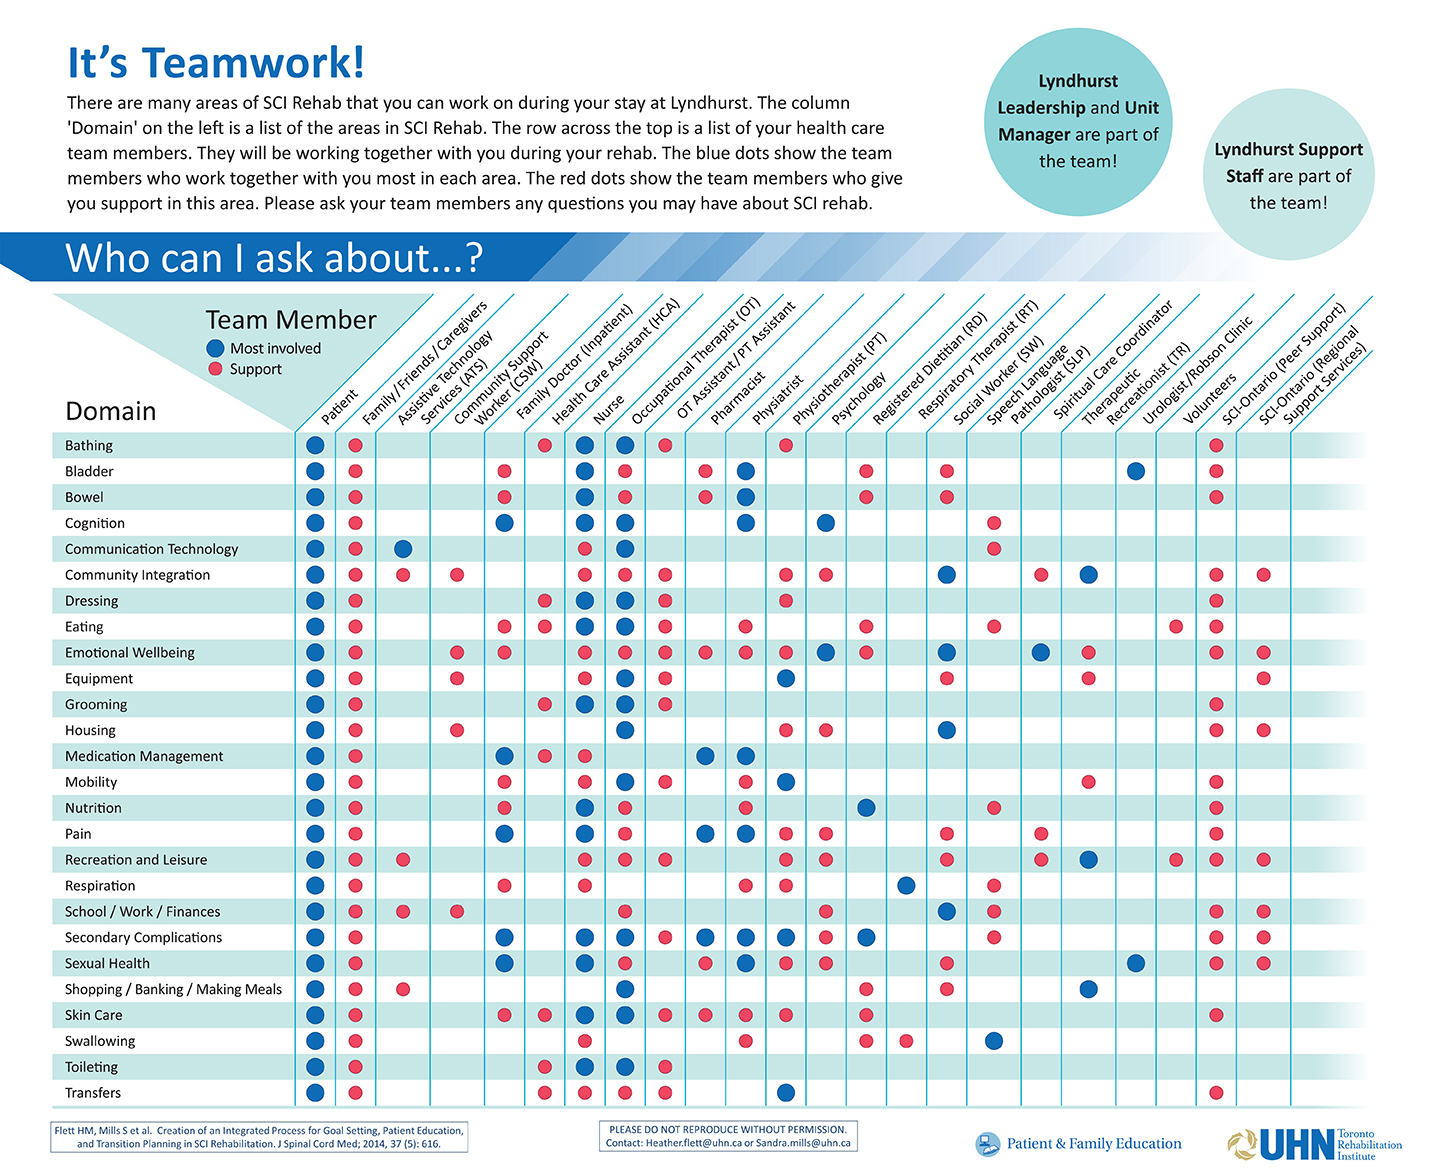 It’s Teamwork Poster. This poster lists all of the areas that your spinal cord injury could affect and who is most involved in helping you with these domains. The blue and red dots indicate who is most involved and who can support you with these goals.